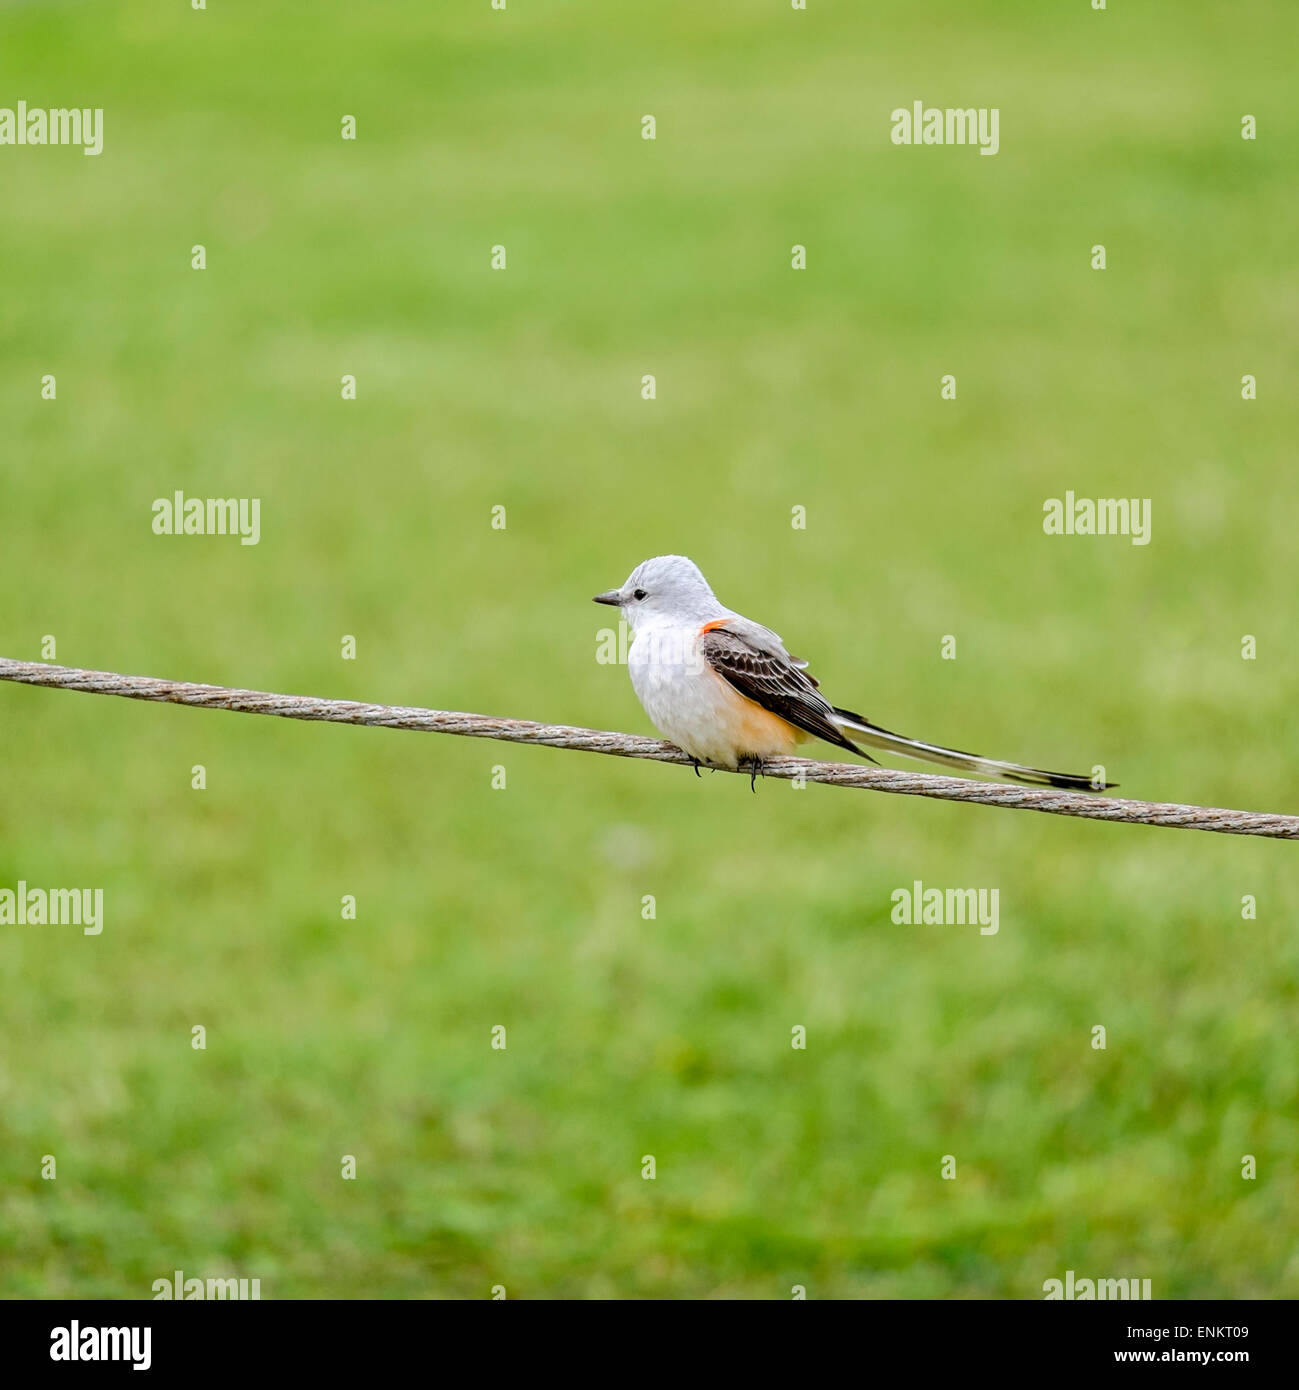 A Scissor-tailed Flycatcher or Tyrannus forficatus, perched on a fence cable. Oklahoma's state bird. Oklahoma, USA Stock Photo